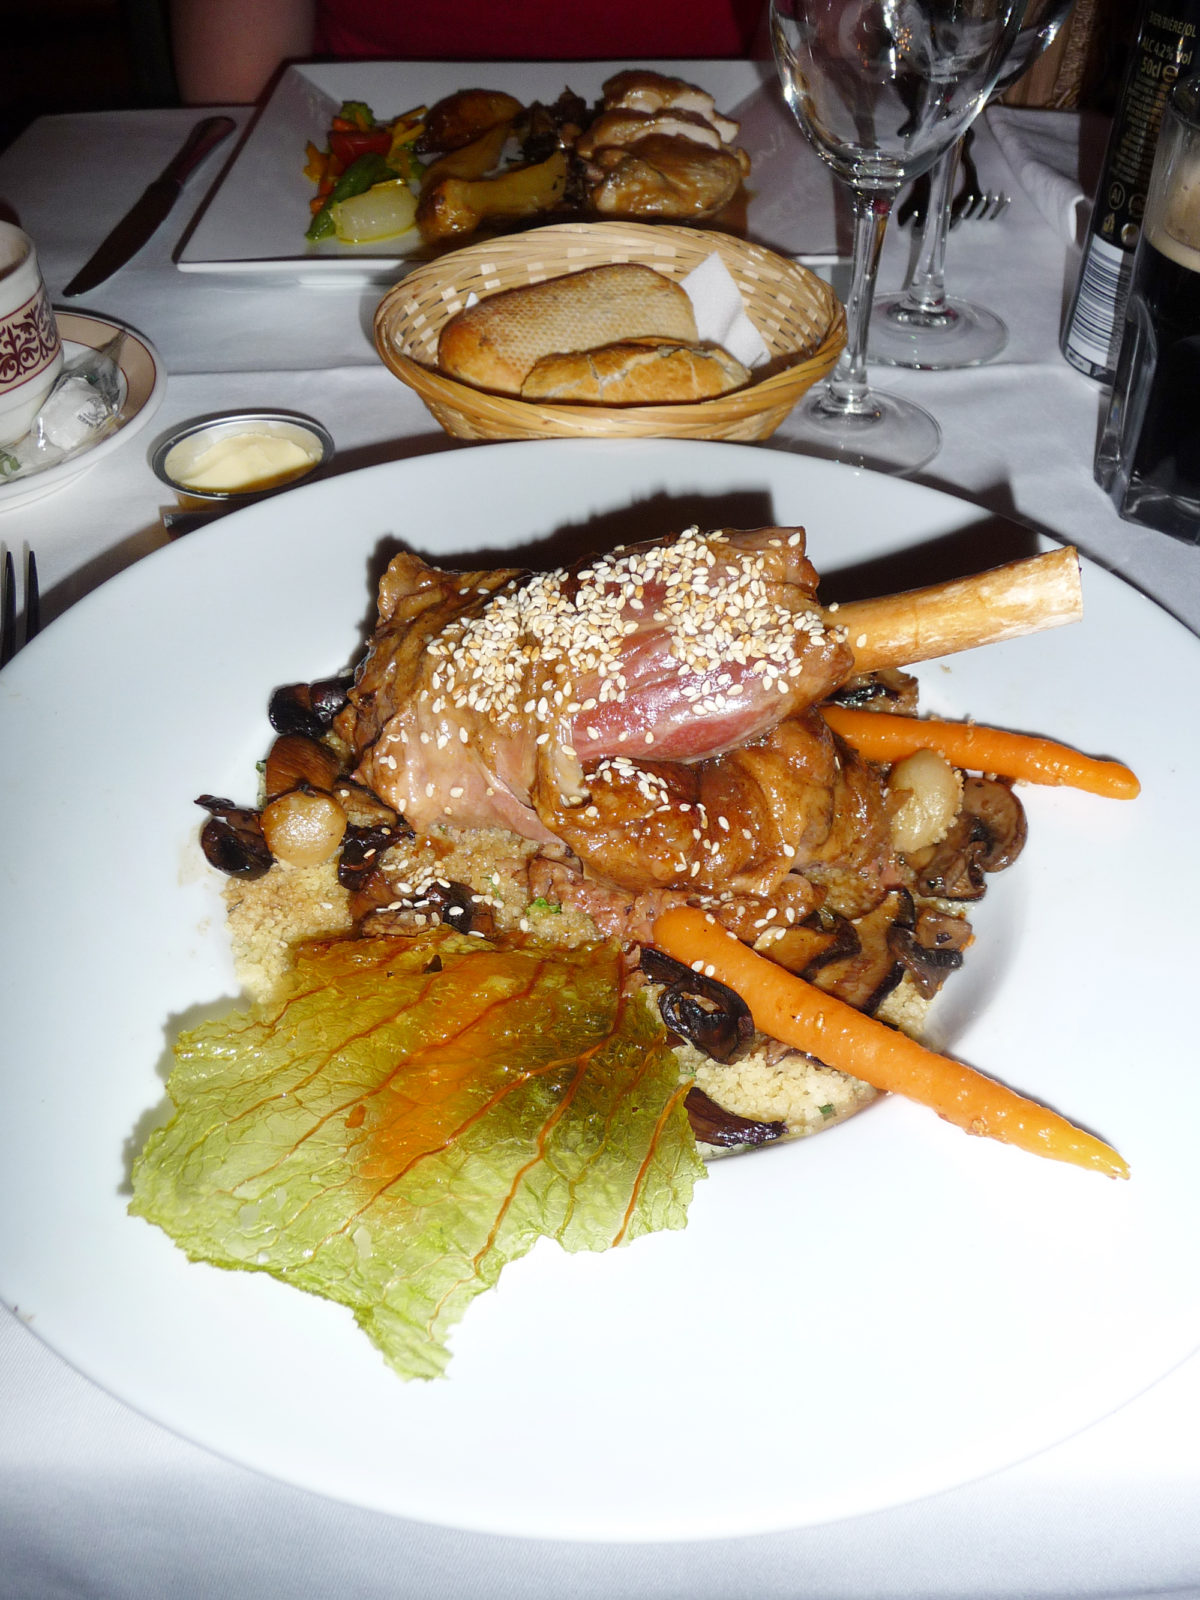 Image shows a main course from walt's restaurant in disneyland paris